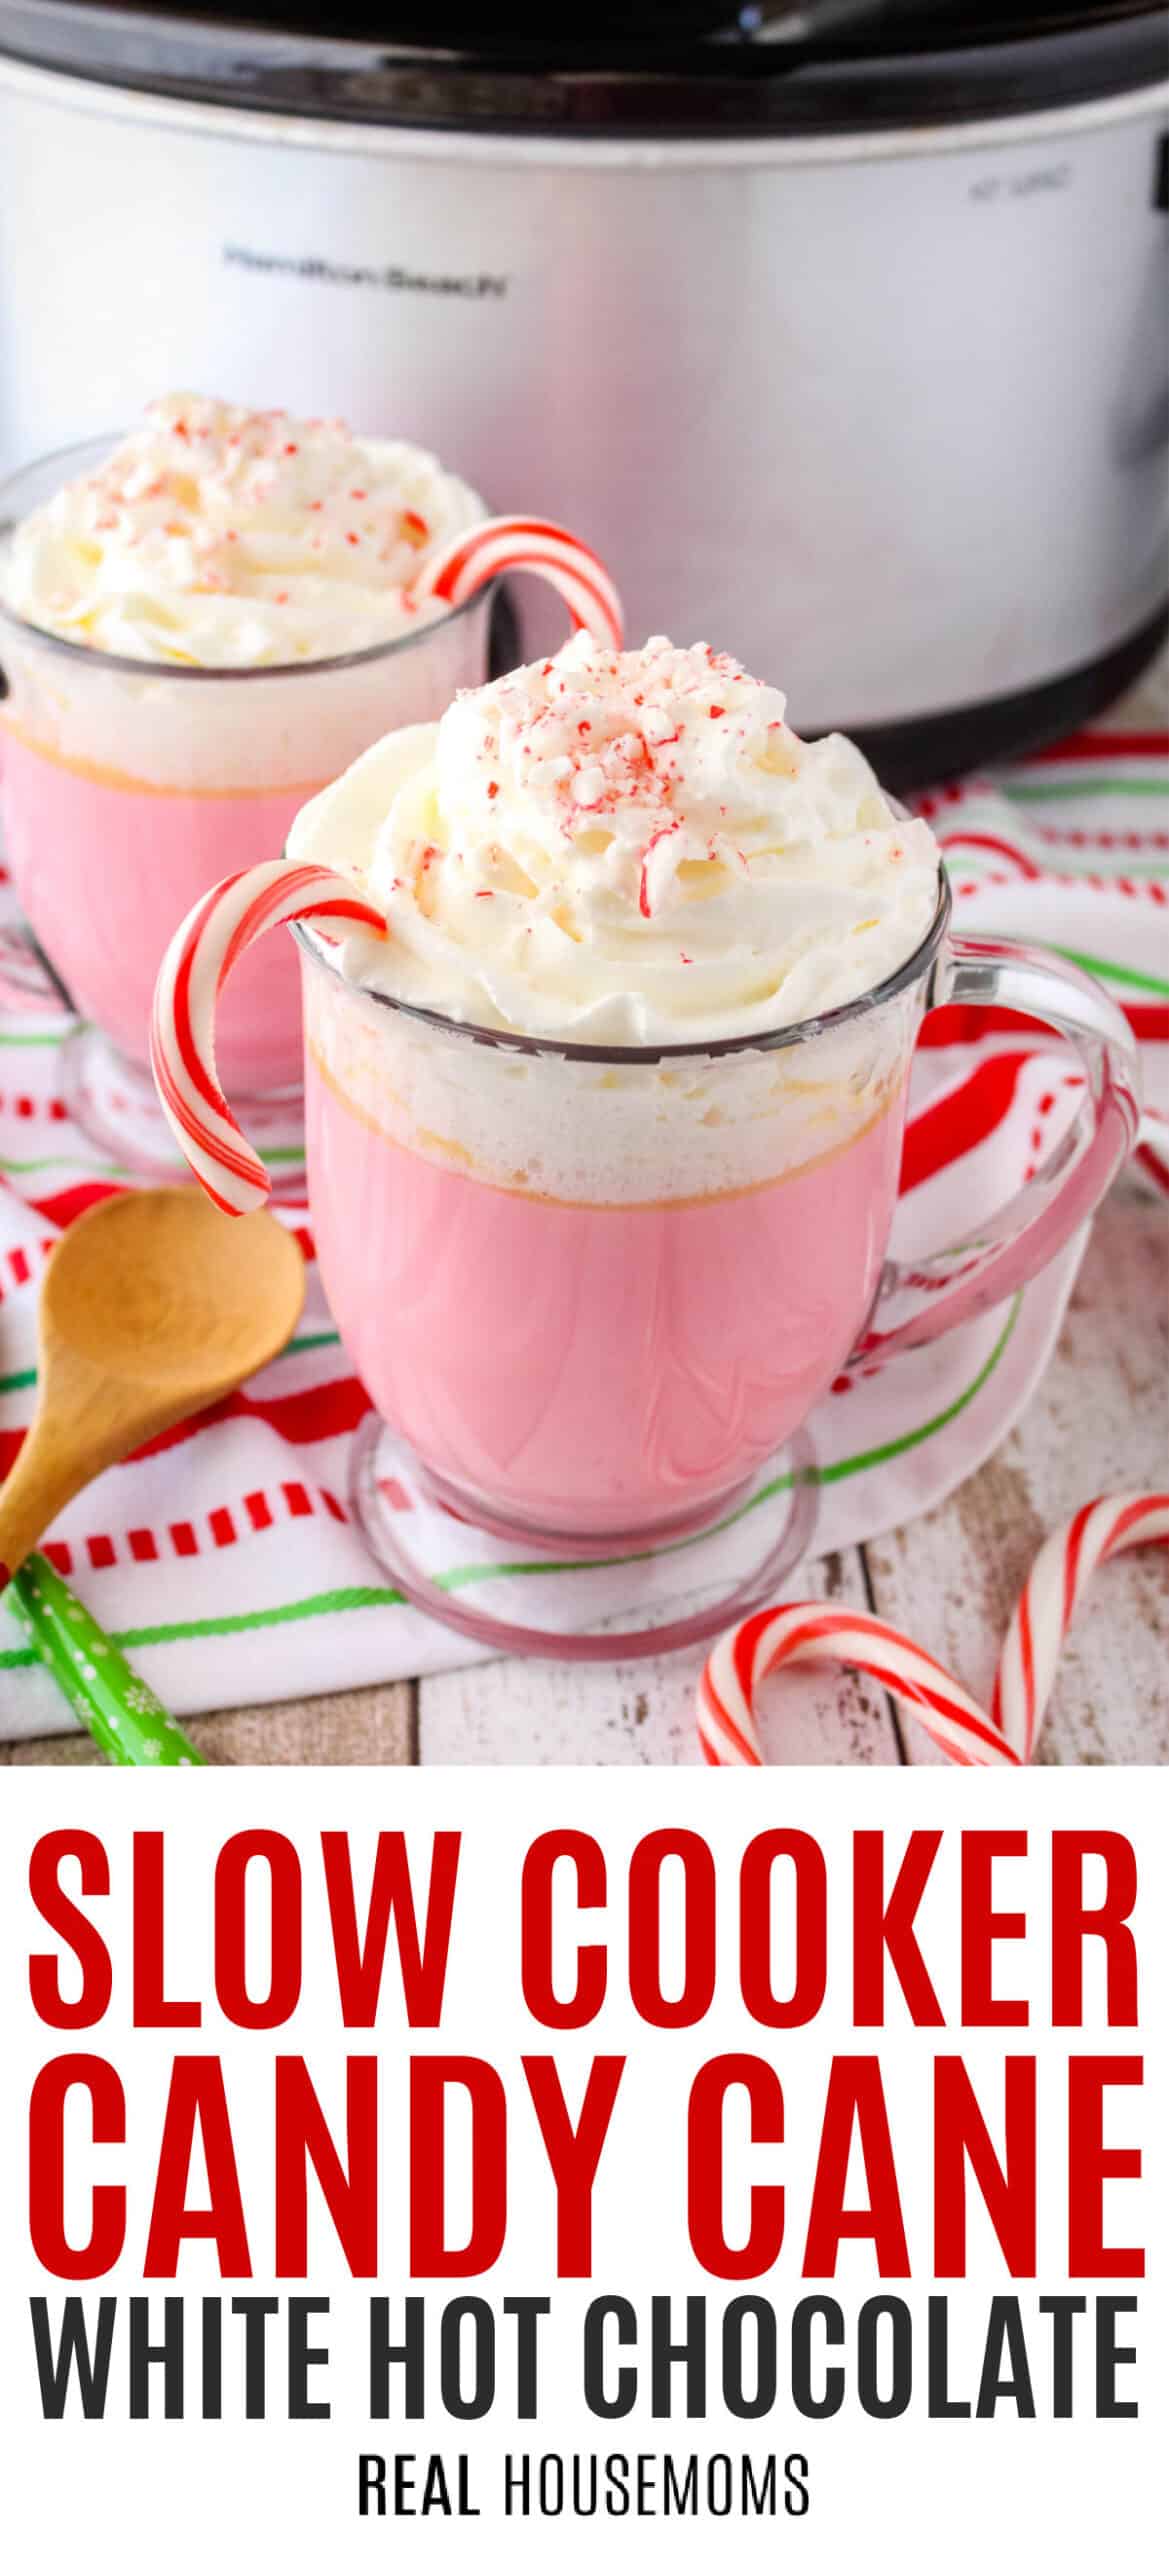 https://realhousemoms.com/wp-content/uploads/Slow-Cooker-Candy-Cane-White-Hot-Chocolate-HERO-scaled.jpg